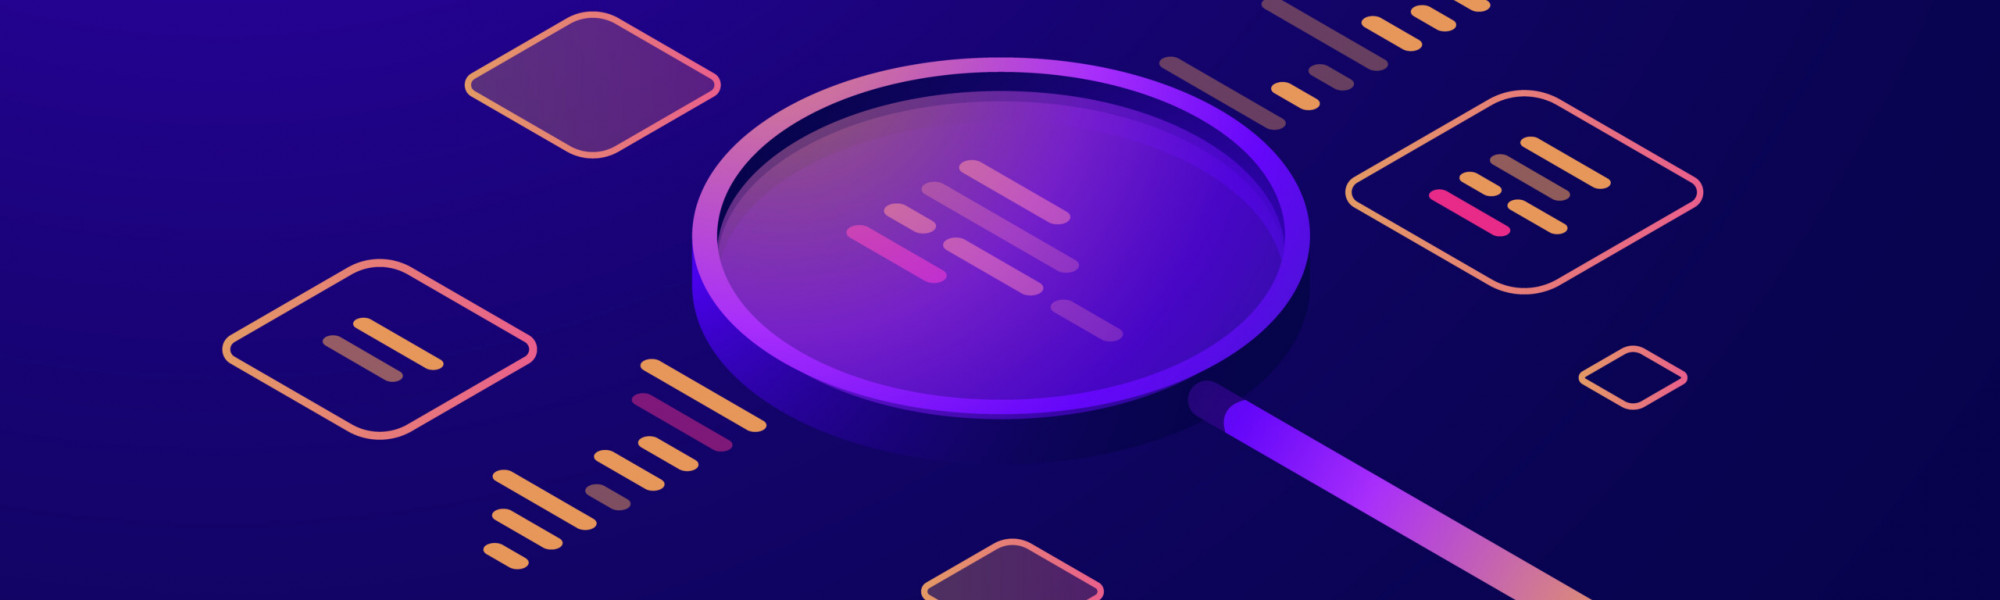 Data processing isometric icon, business analytics and statistics, magnifying glass, data visualization, infographic dark neon vector